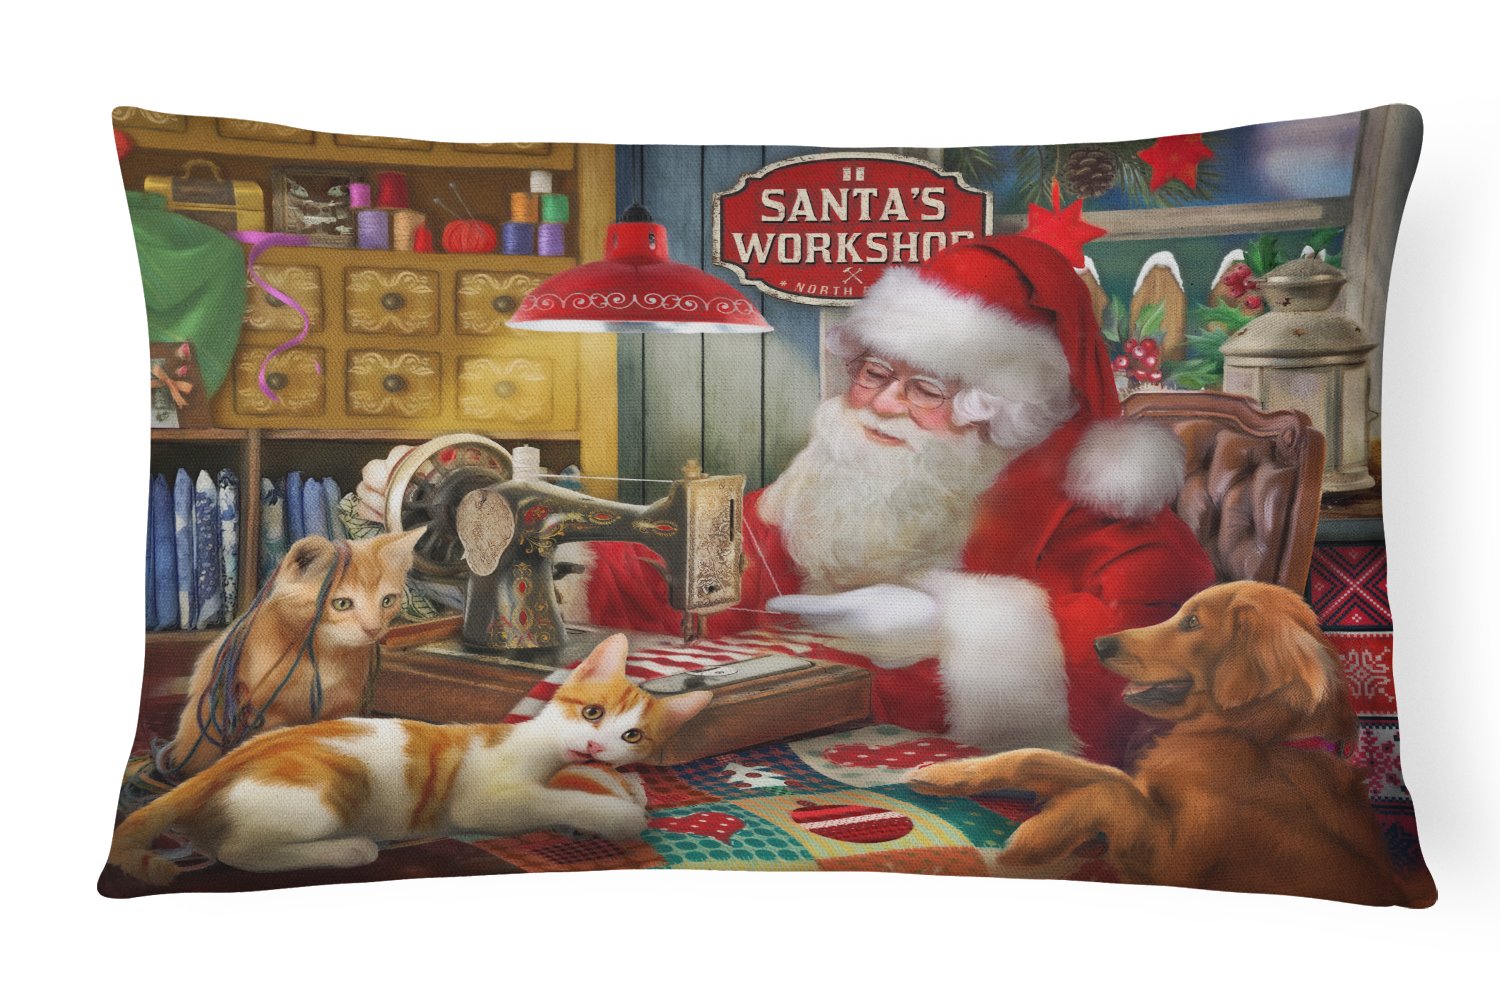 Santa's Workshop, Golden Retriever and Cats Canvas Fabric Decorative Pillow PTW2067PW1216 by Caroline's Treasures